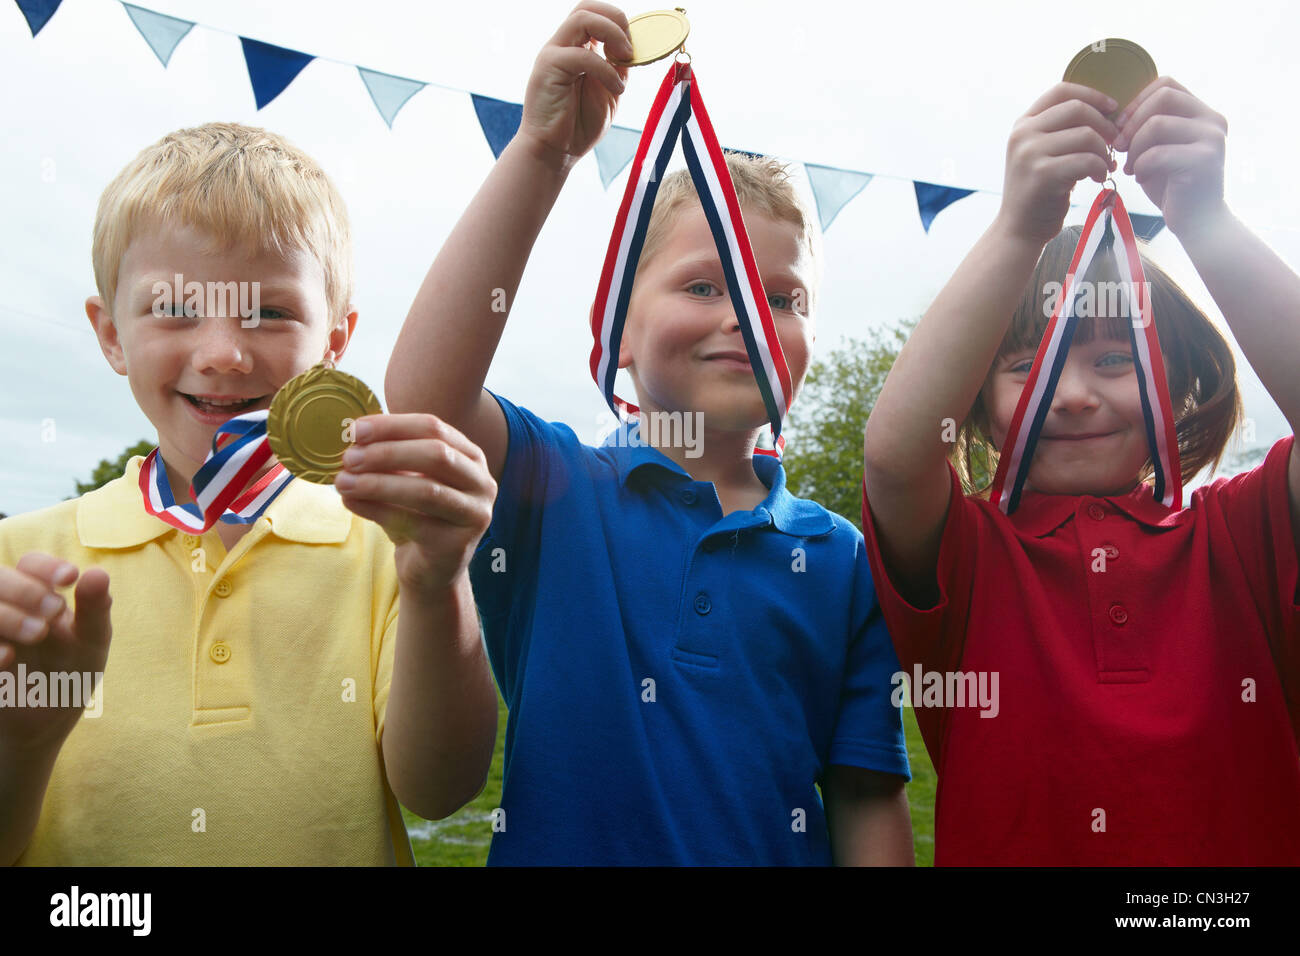 Three children holding sports medals on the school playing field Stock Photo